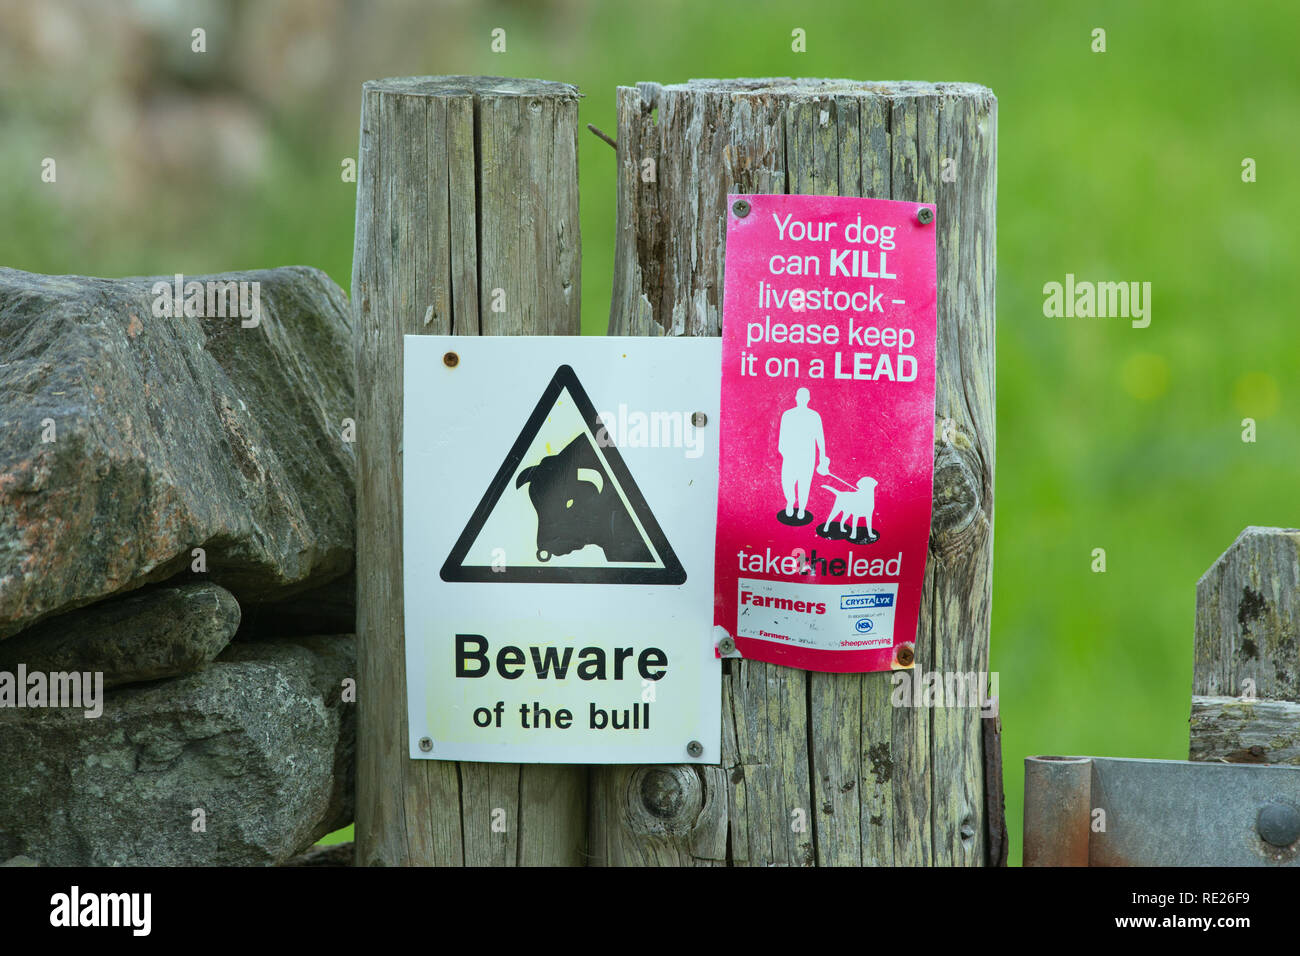 Warning Signs. Beware of the bull. Your Dog can KILL livestock-please keep on a LEAD, To walkers, hikers, ramblers, dog owners, using the footpath. The Isle of Iona, Inner Hebrides. West Coast of Scotland. Stock Photo